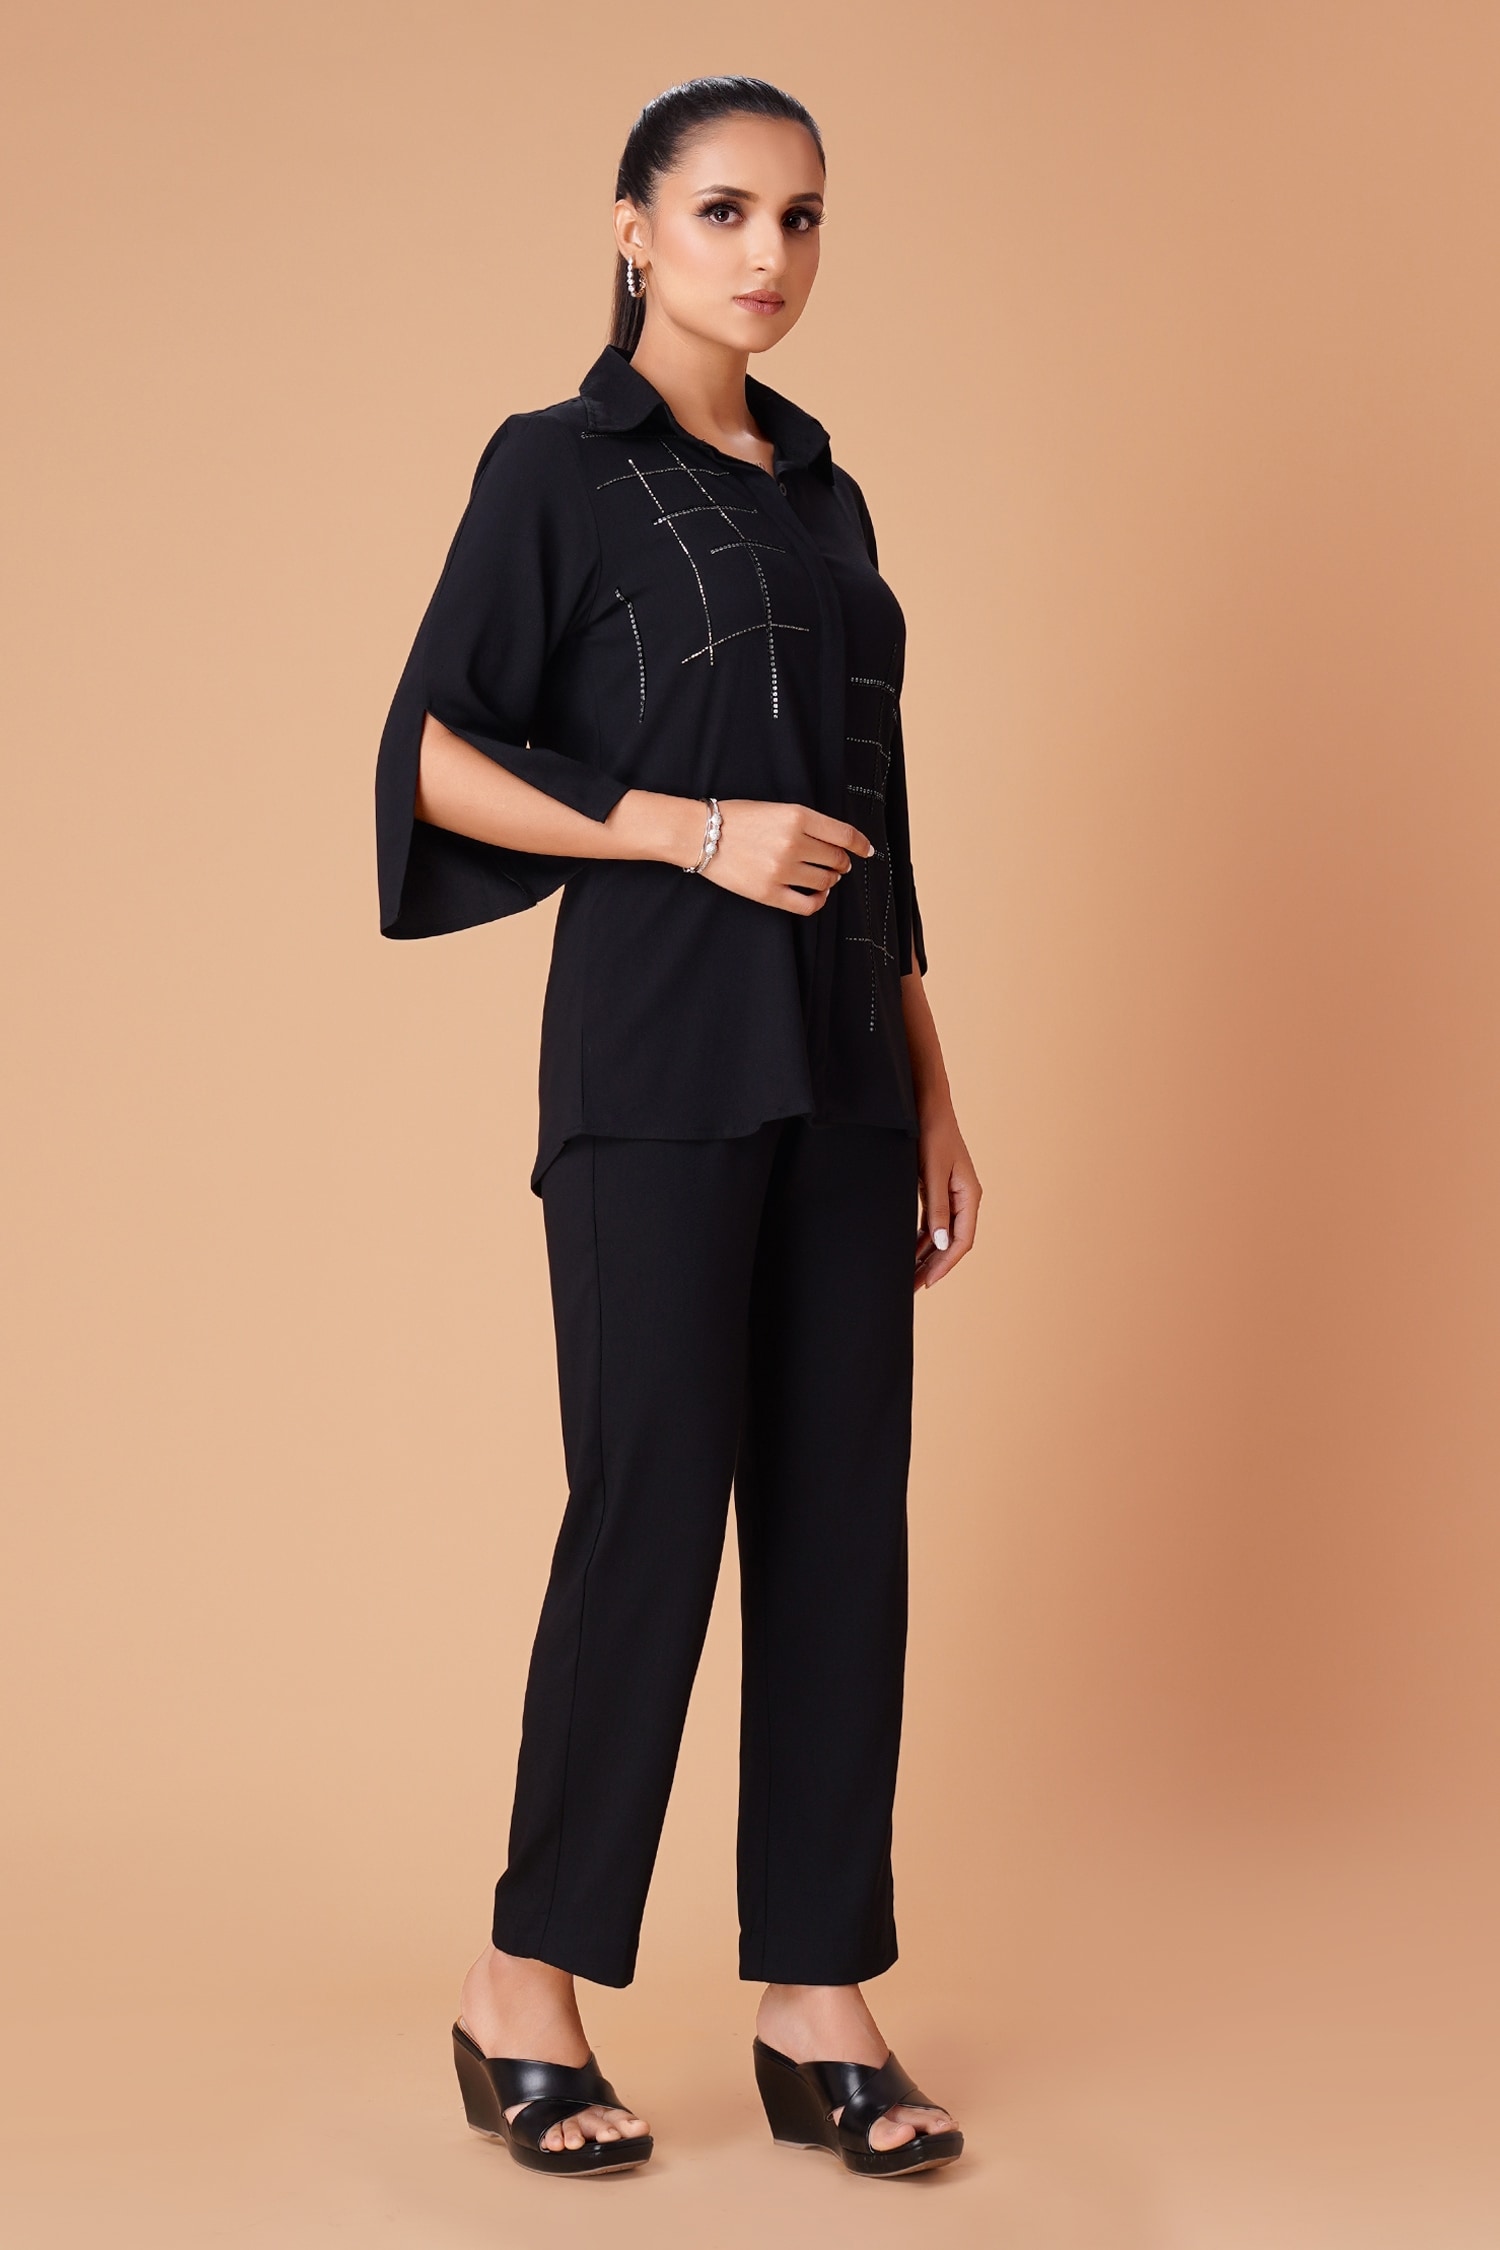 Women's chic set (tunique/embroidered shirt and its matching pants) - Black  Colour Select size XS - Amelis